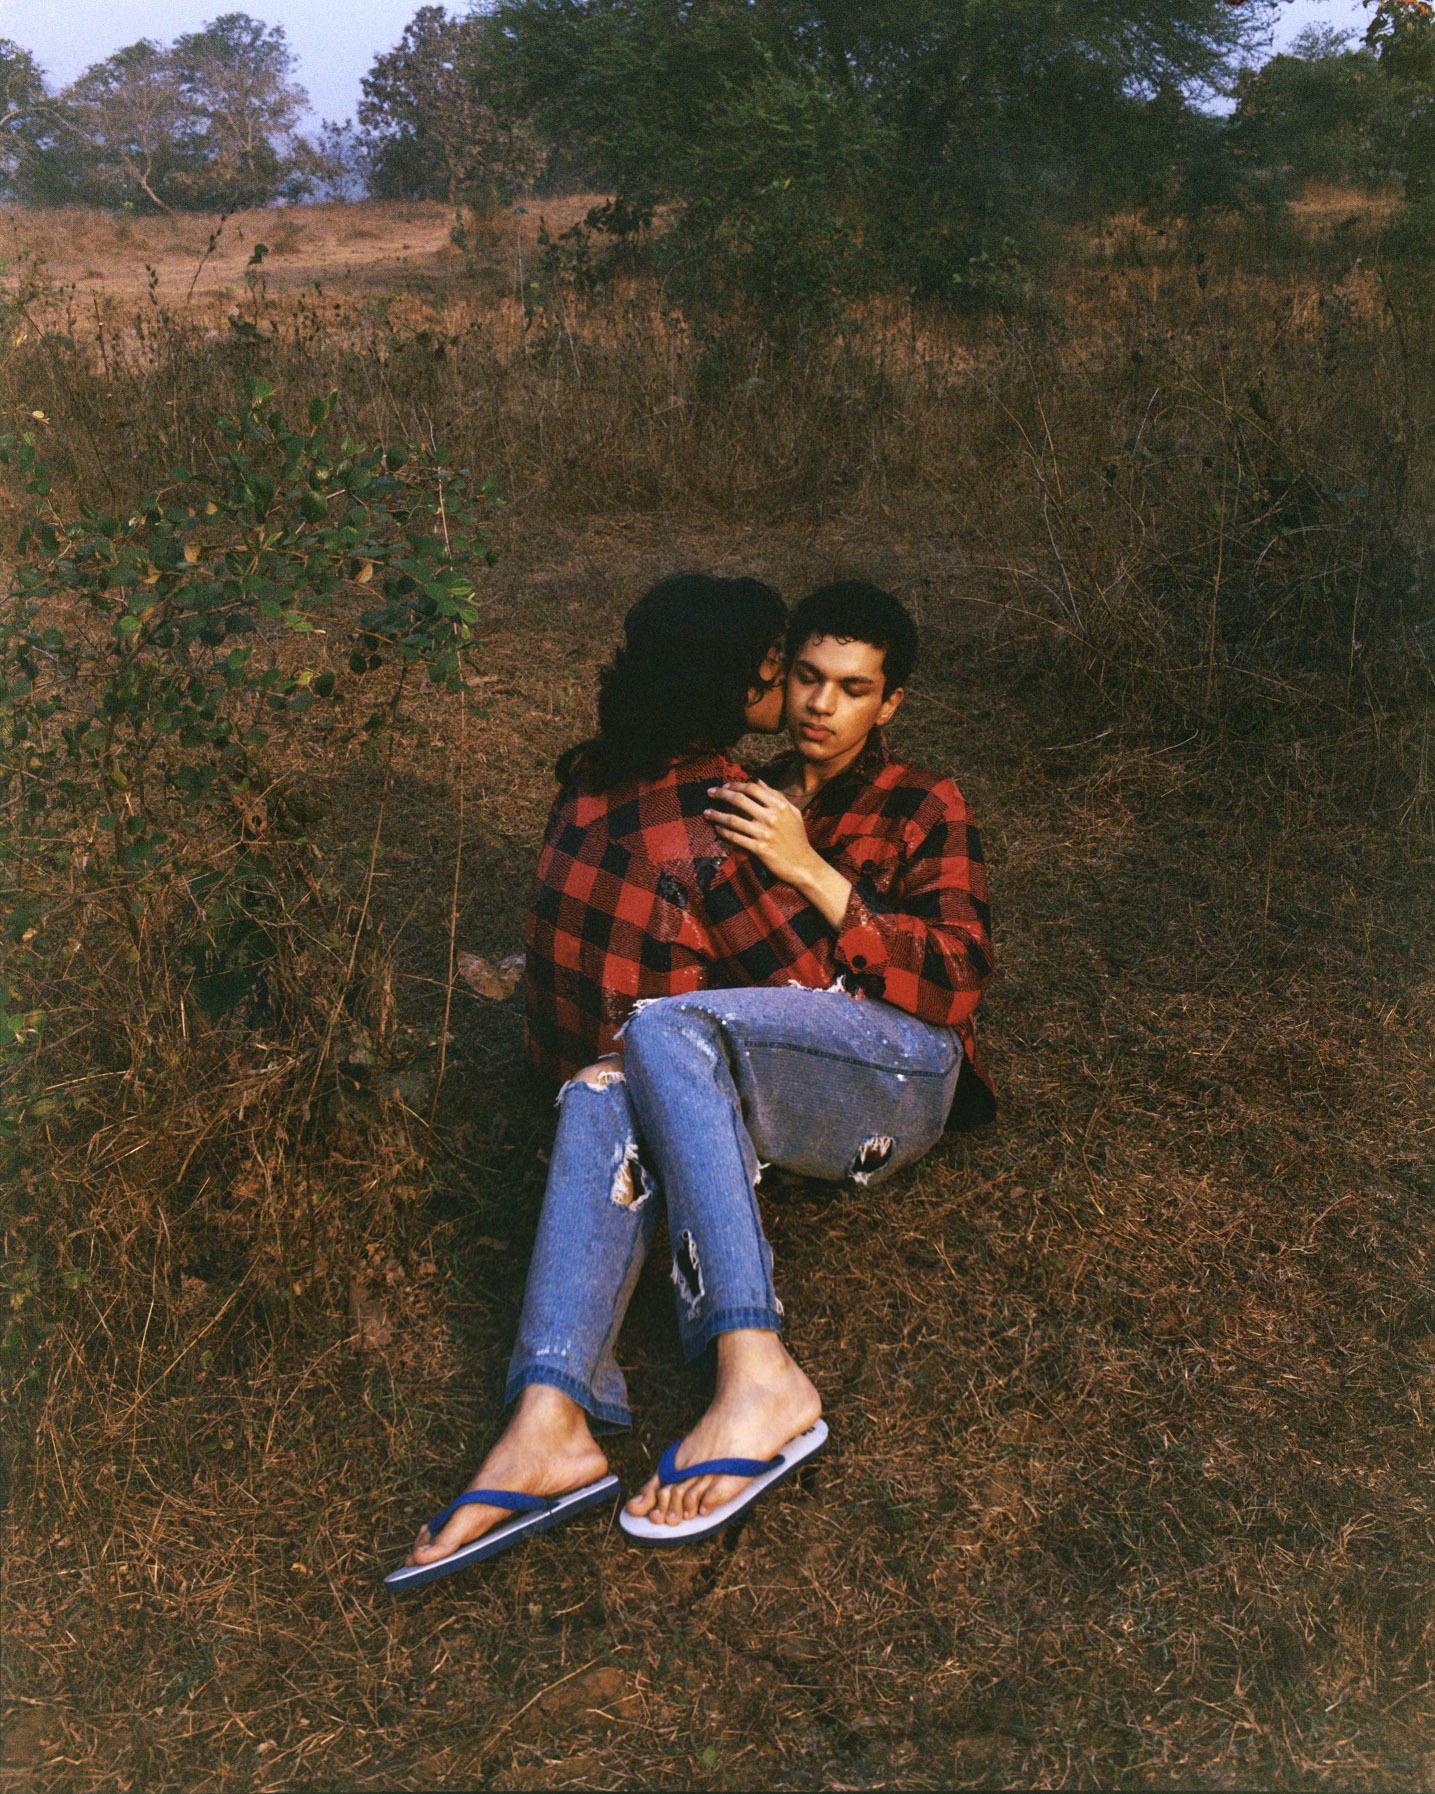 Image of two men embracing. They are sitting on the grass and the face of one person is visible. They are both wearing red and black checkered shirts and the figure to the right is wearing sequined jeans. He also wears blue flip flops. This is an images has a film-like quality.